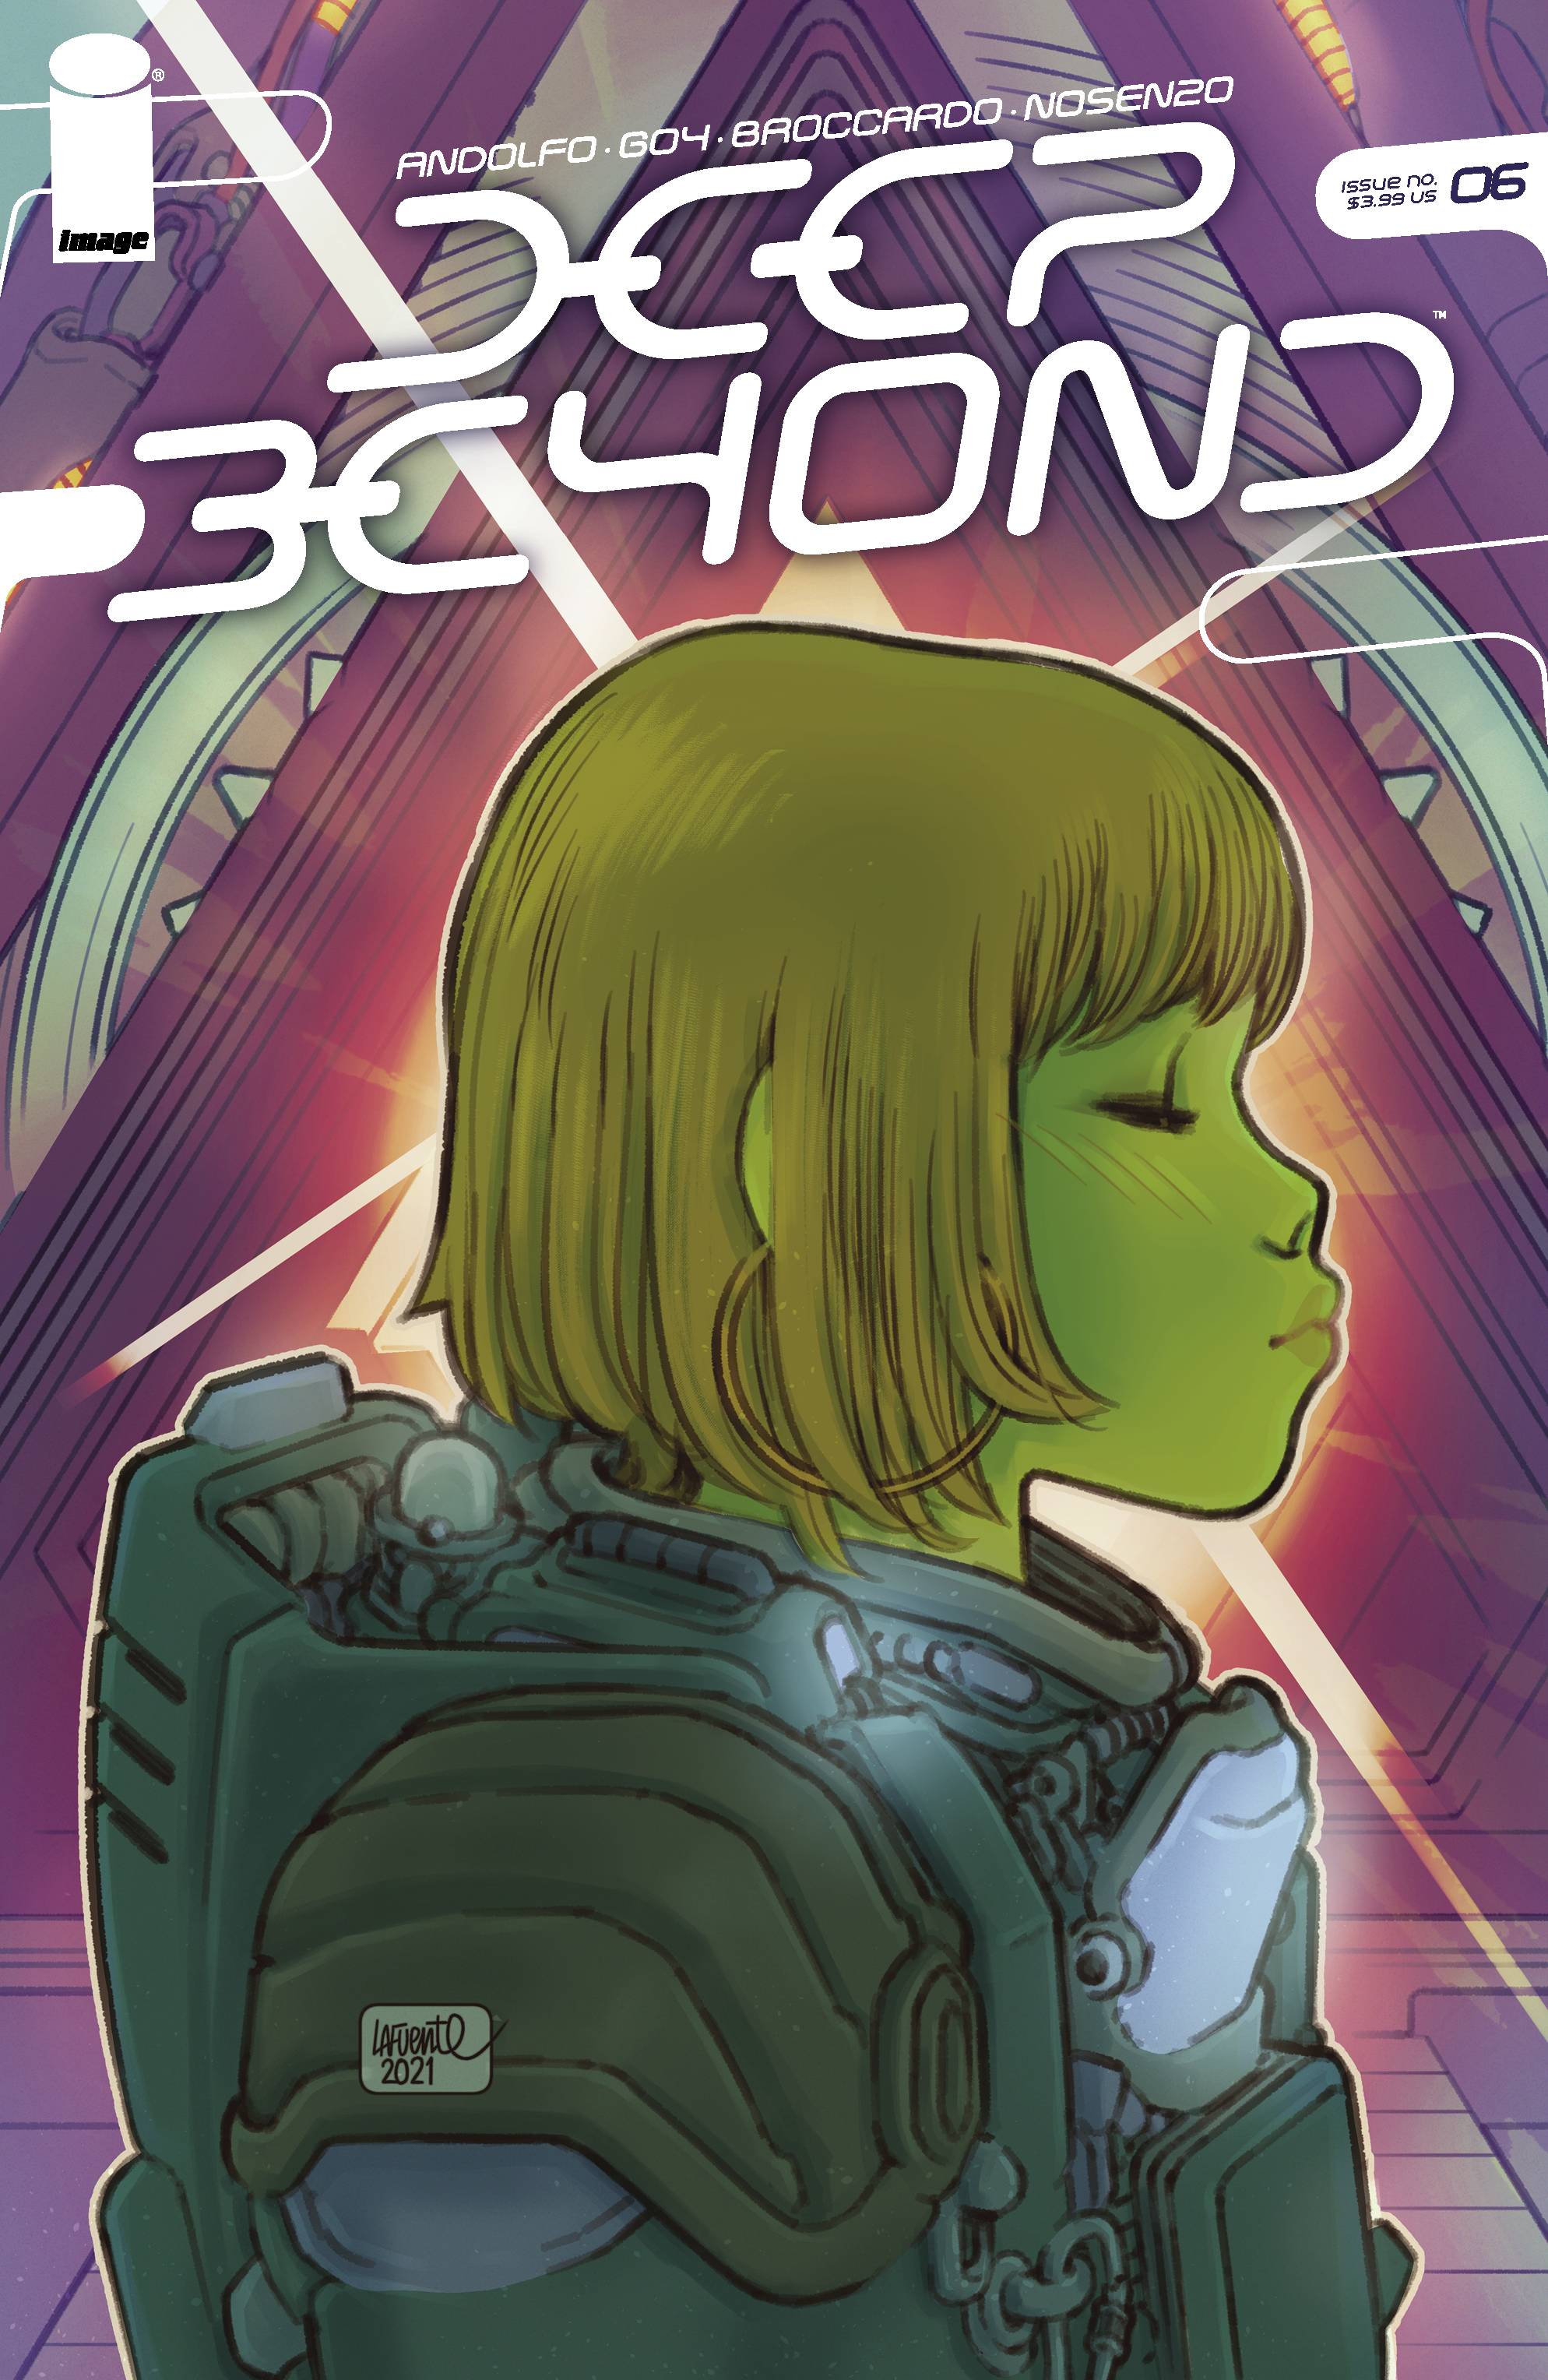 Deep Beyond #6 Cover C Lafuente (Of 12)